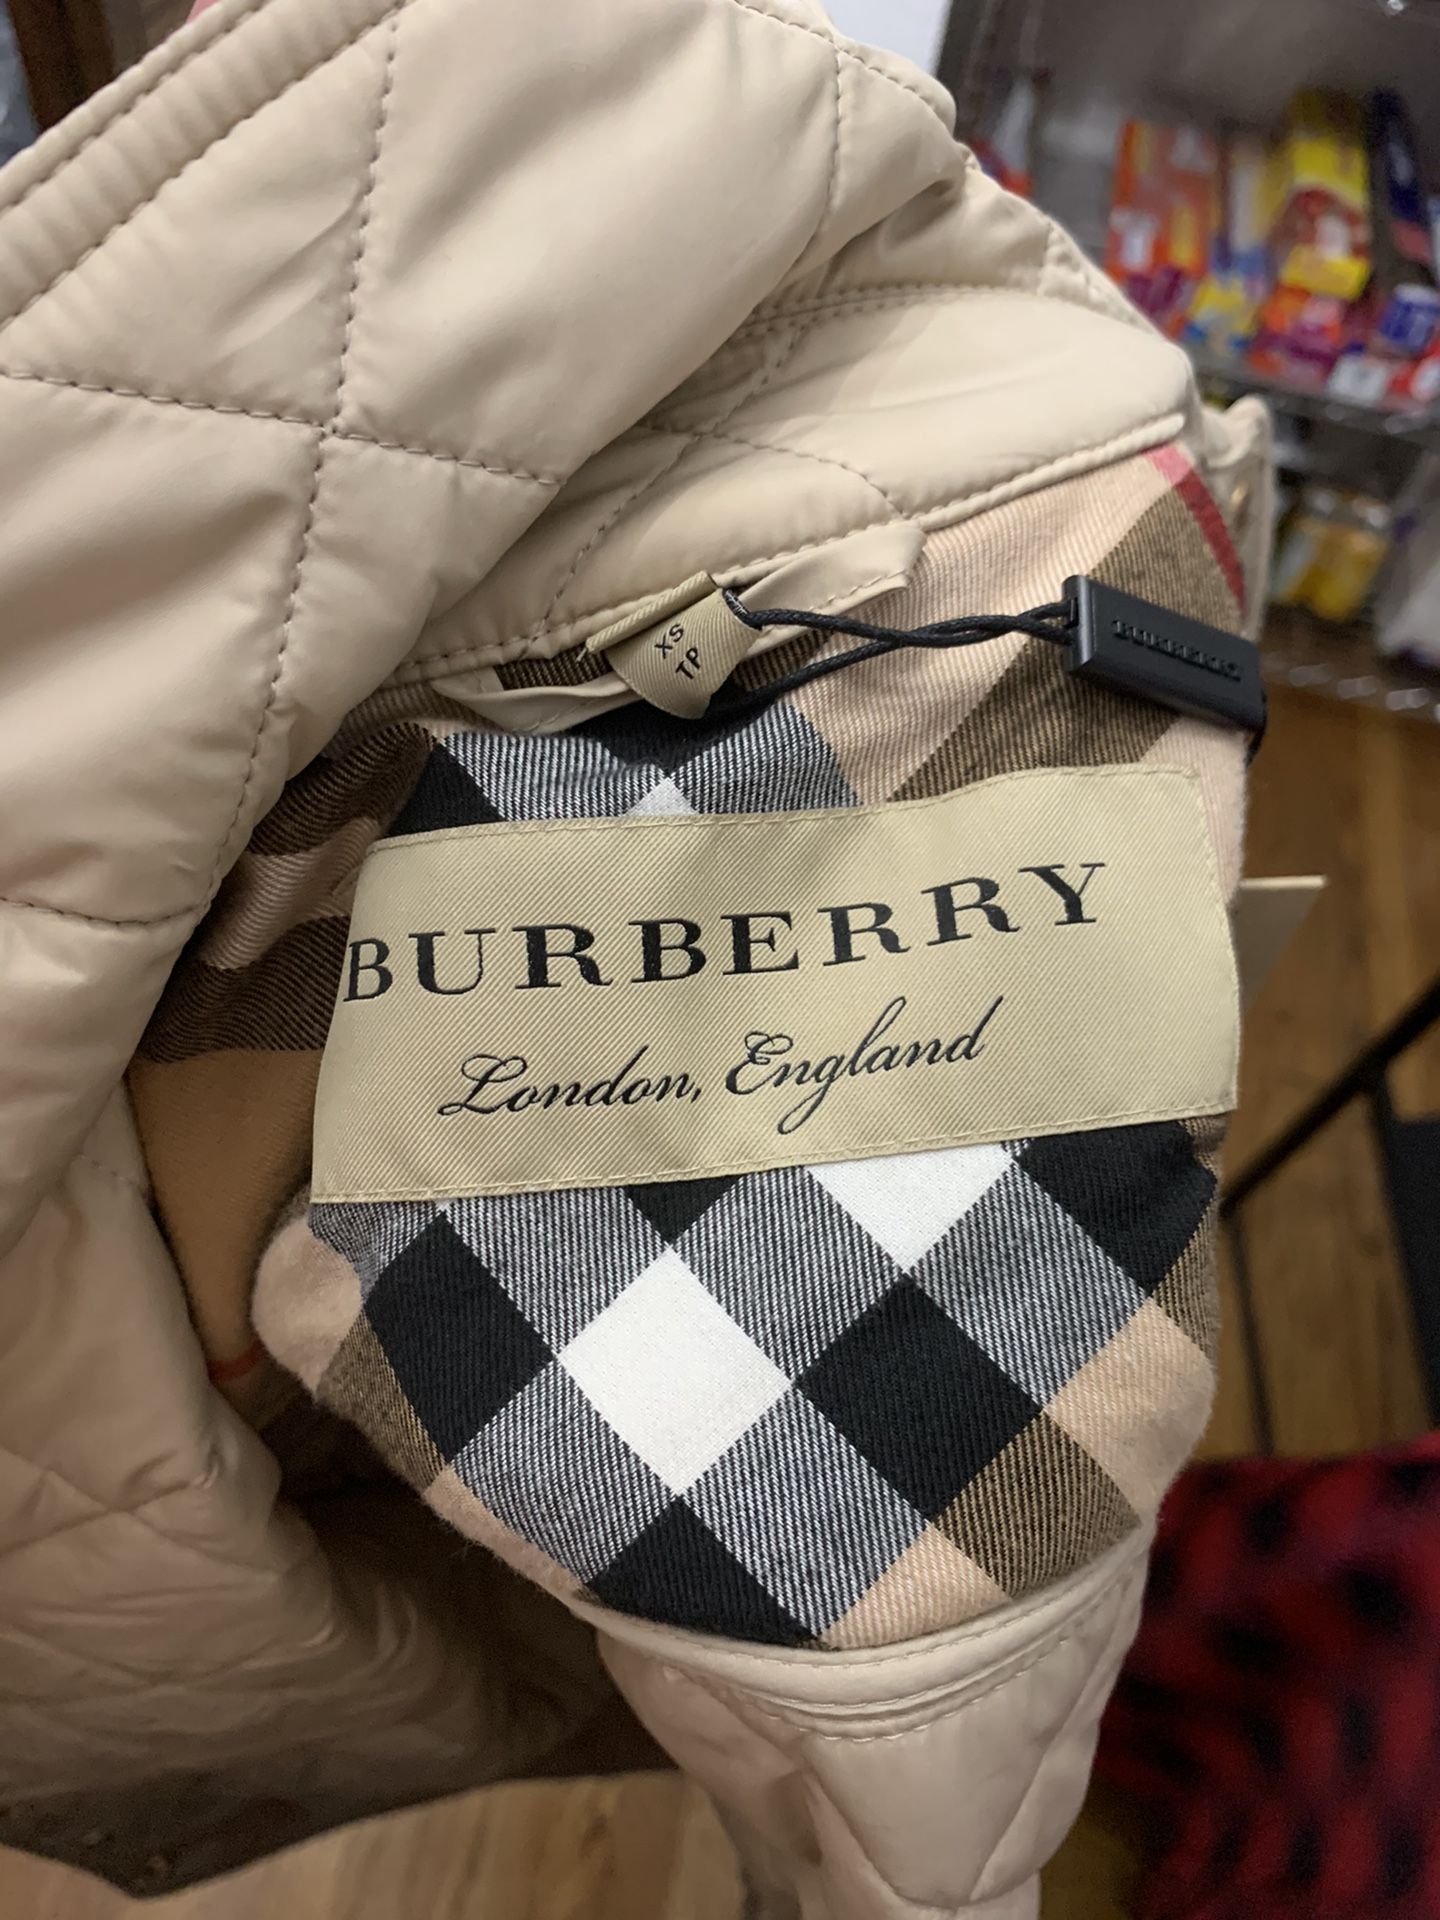 BRAND NEW WOMENS SIZE XS BURBERRY JACKET! 100% AUTHENTIC!